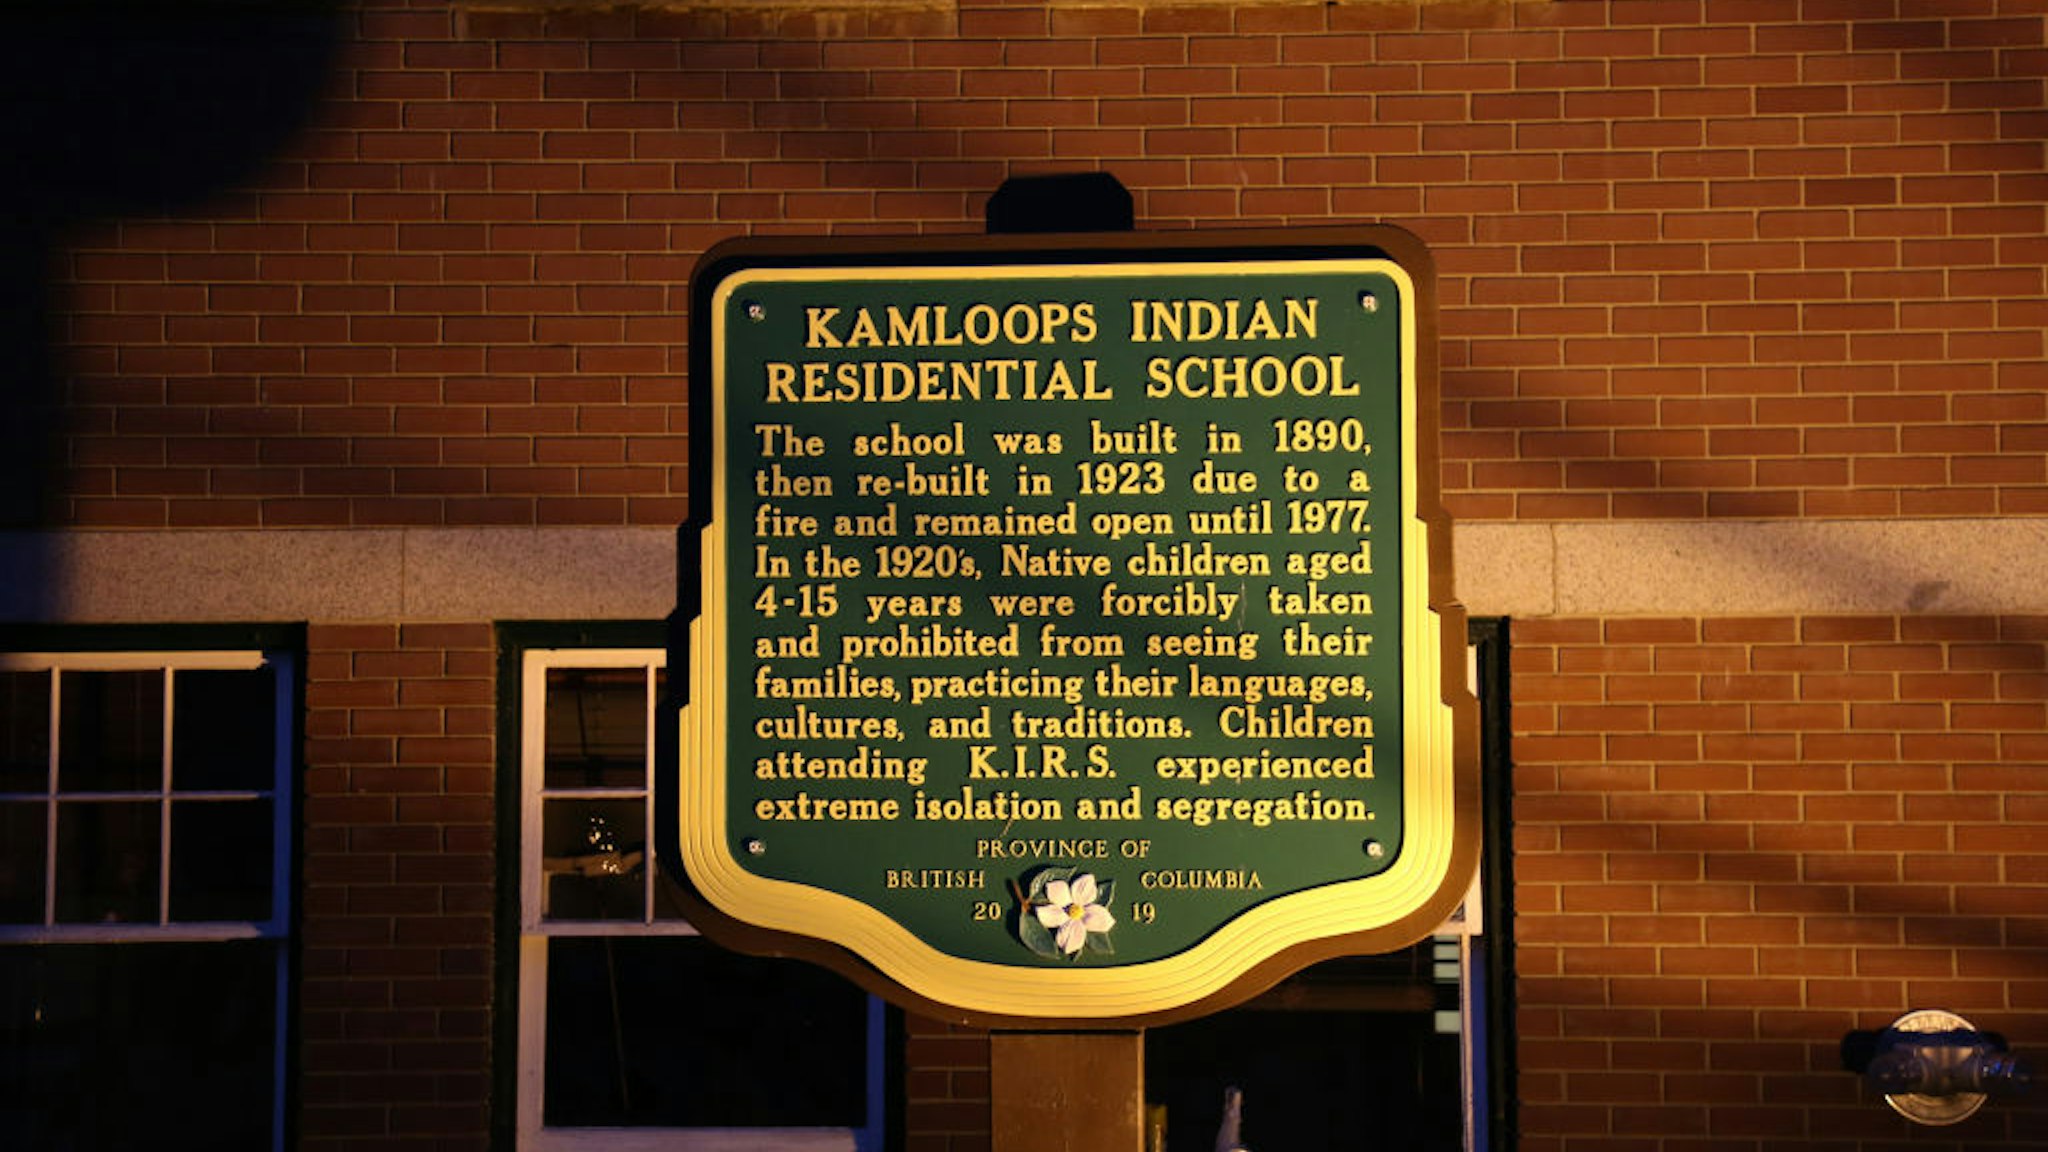 Former Kamloops Indian Residential School, where remains of 215 Indigenous children were found, is seen in Kamloops, British Columbia, Canada on July 6, 2021.